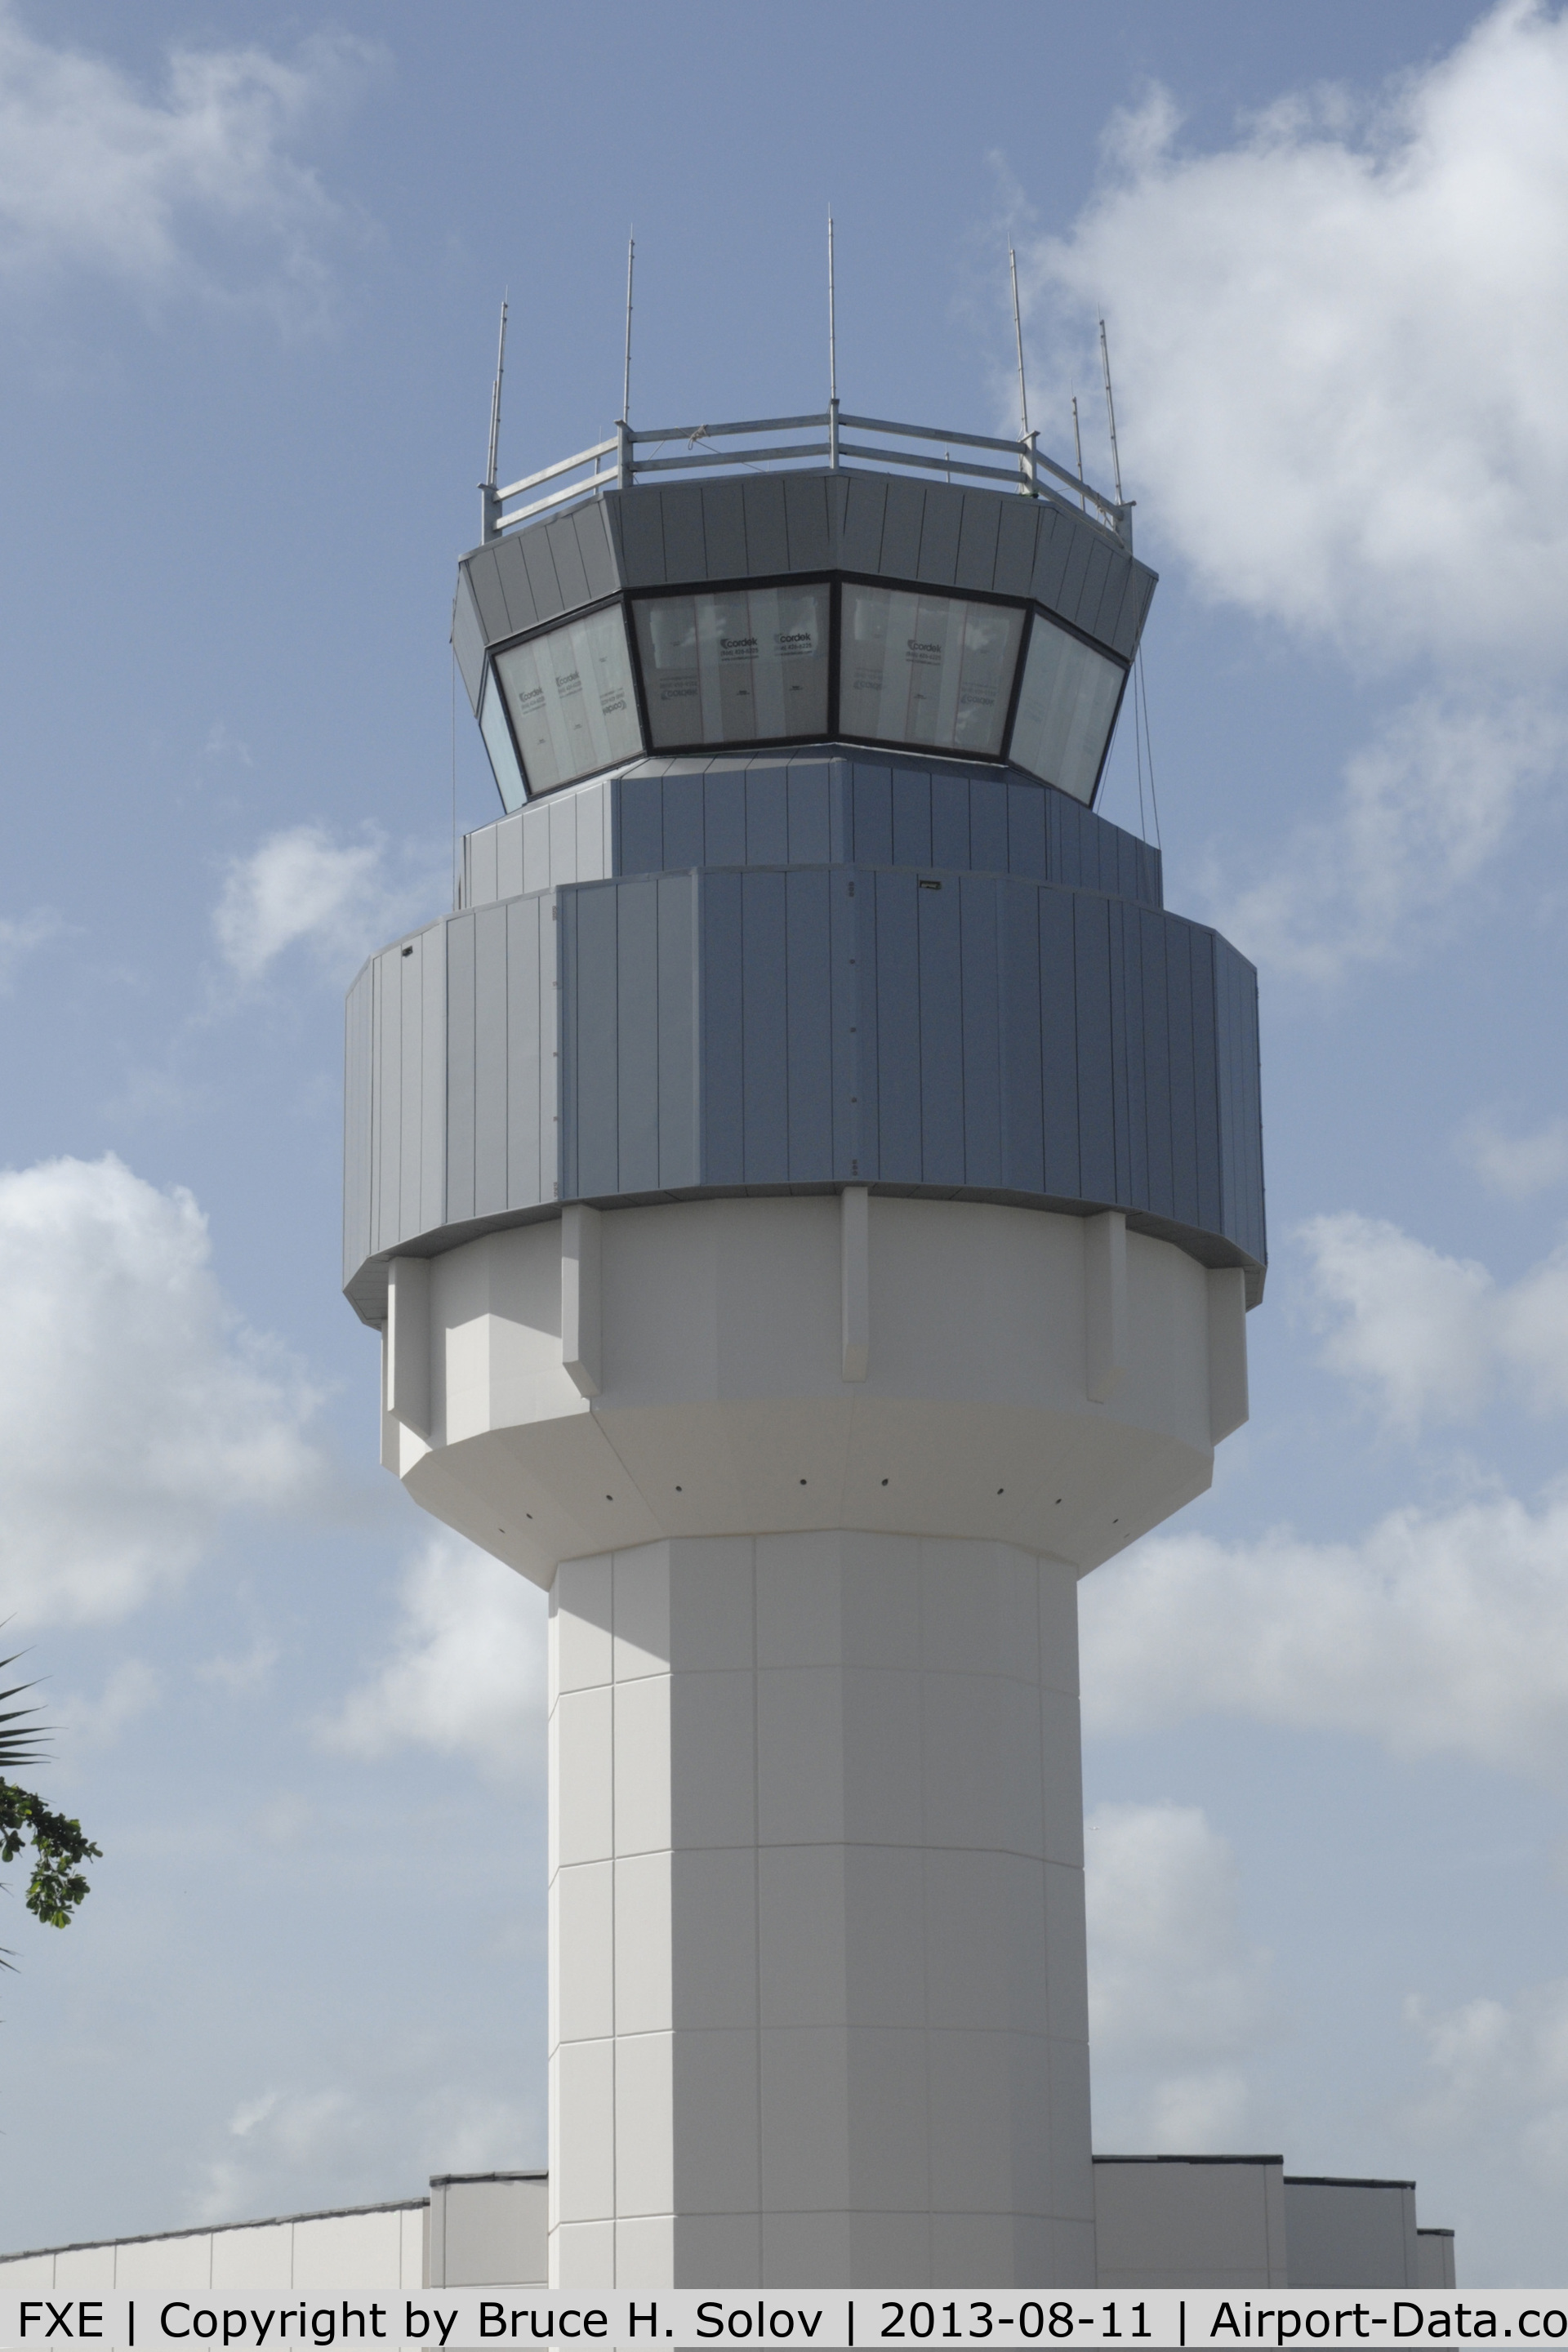 Fort Lauderdale Executive Airport (FXE) - New ATC Tower under construction...showing progress